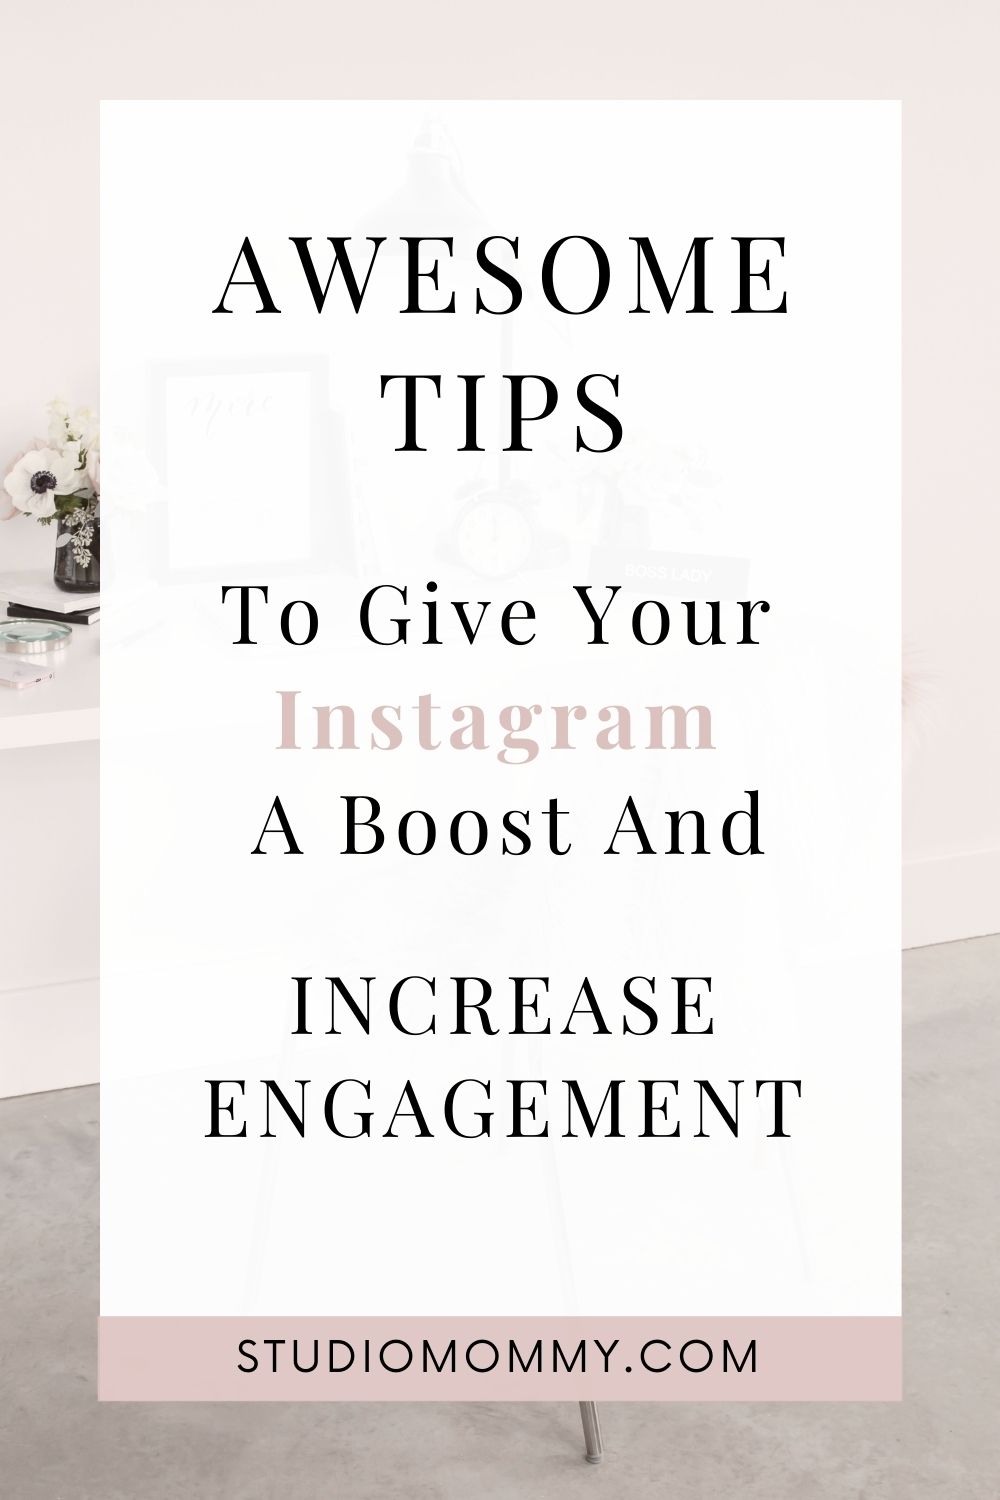 Instagram is the second most popular social media platform (Facebook being the first) with over an 84% engagement rate (Instagram).  Instagram has over 1 billion users monthly, yep, you read that correctly 1 BILLION.  With these stats, it is well worth your while to invest in your Instagram account and make it part of your marketing strategy. Today I am sharing tips on how to increase your engagement and get more Instagram views for your blog.